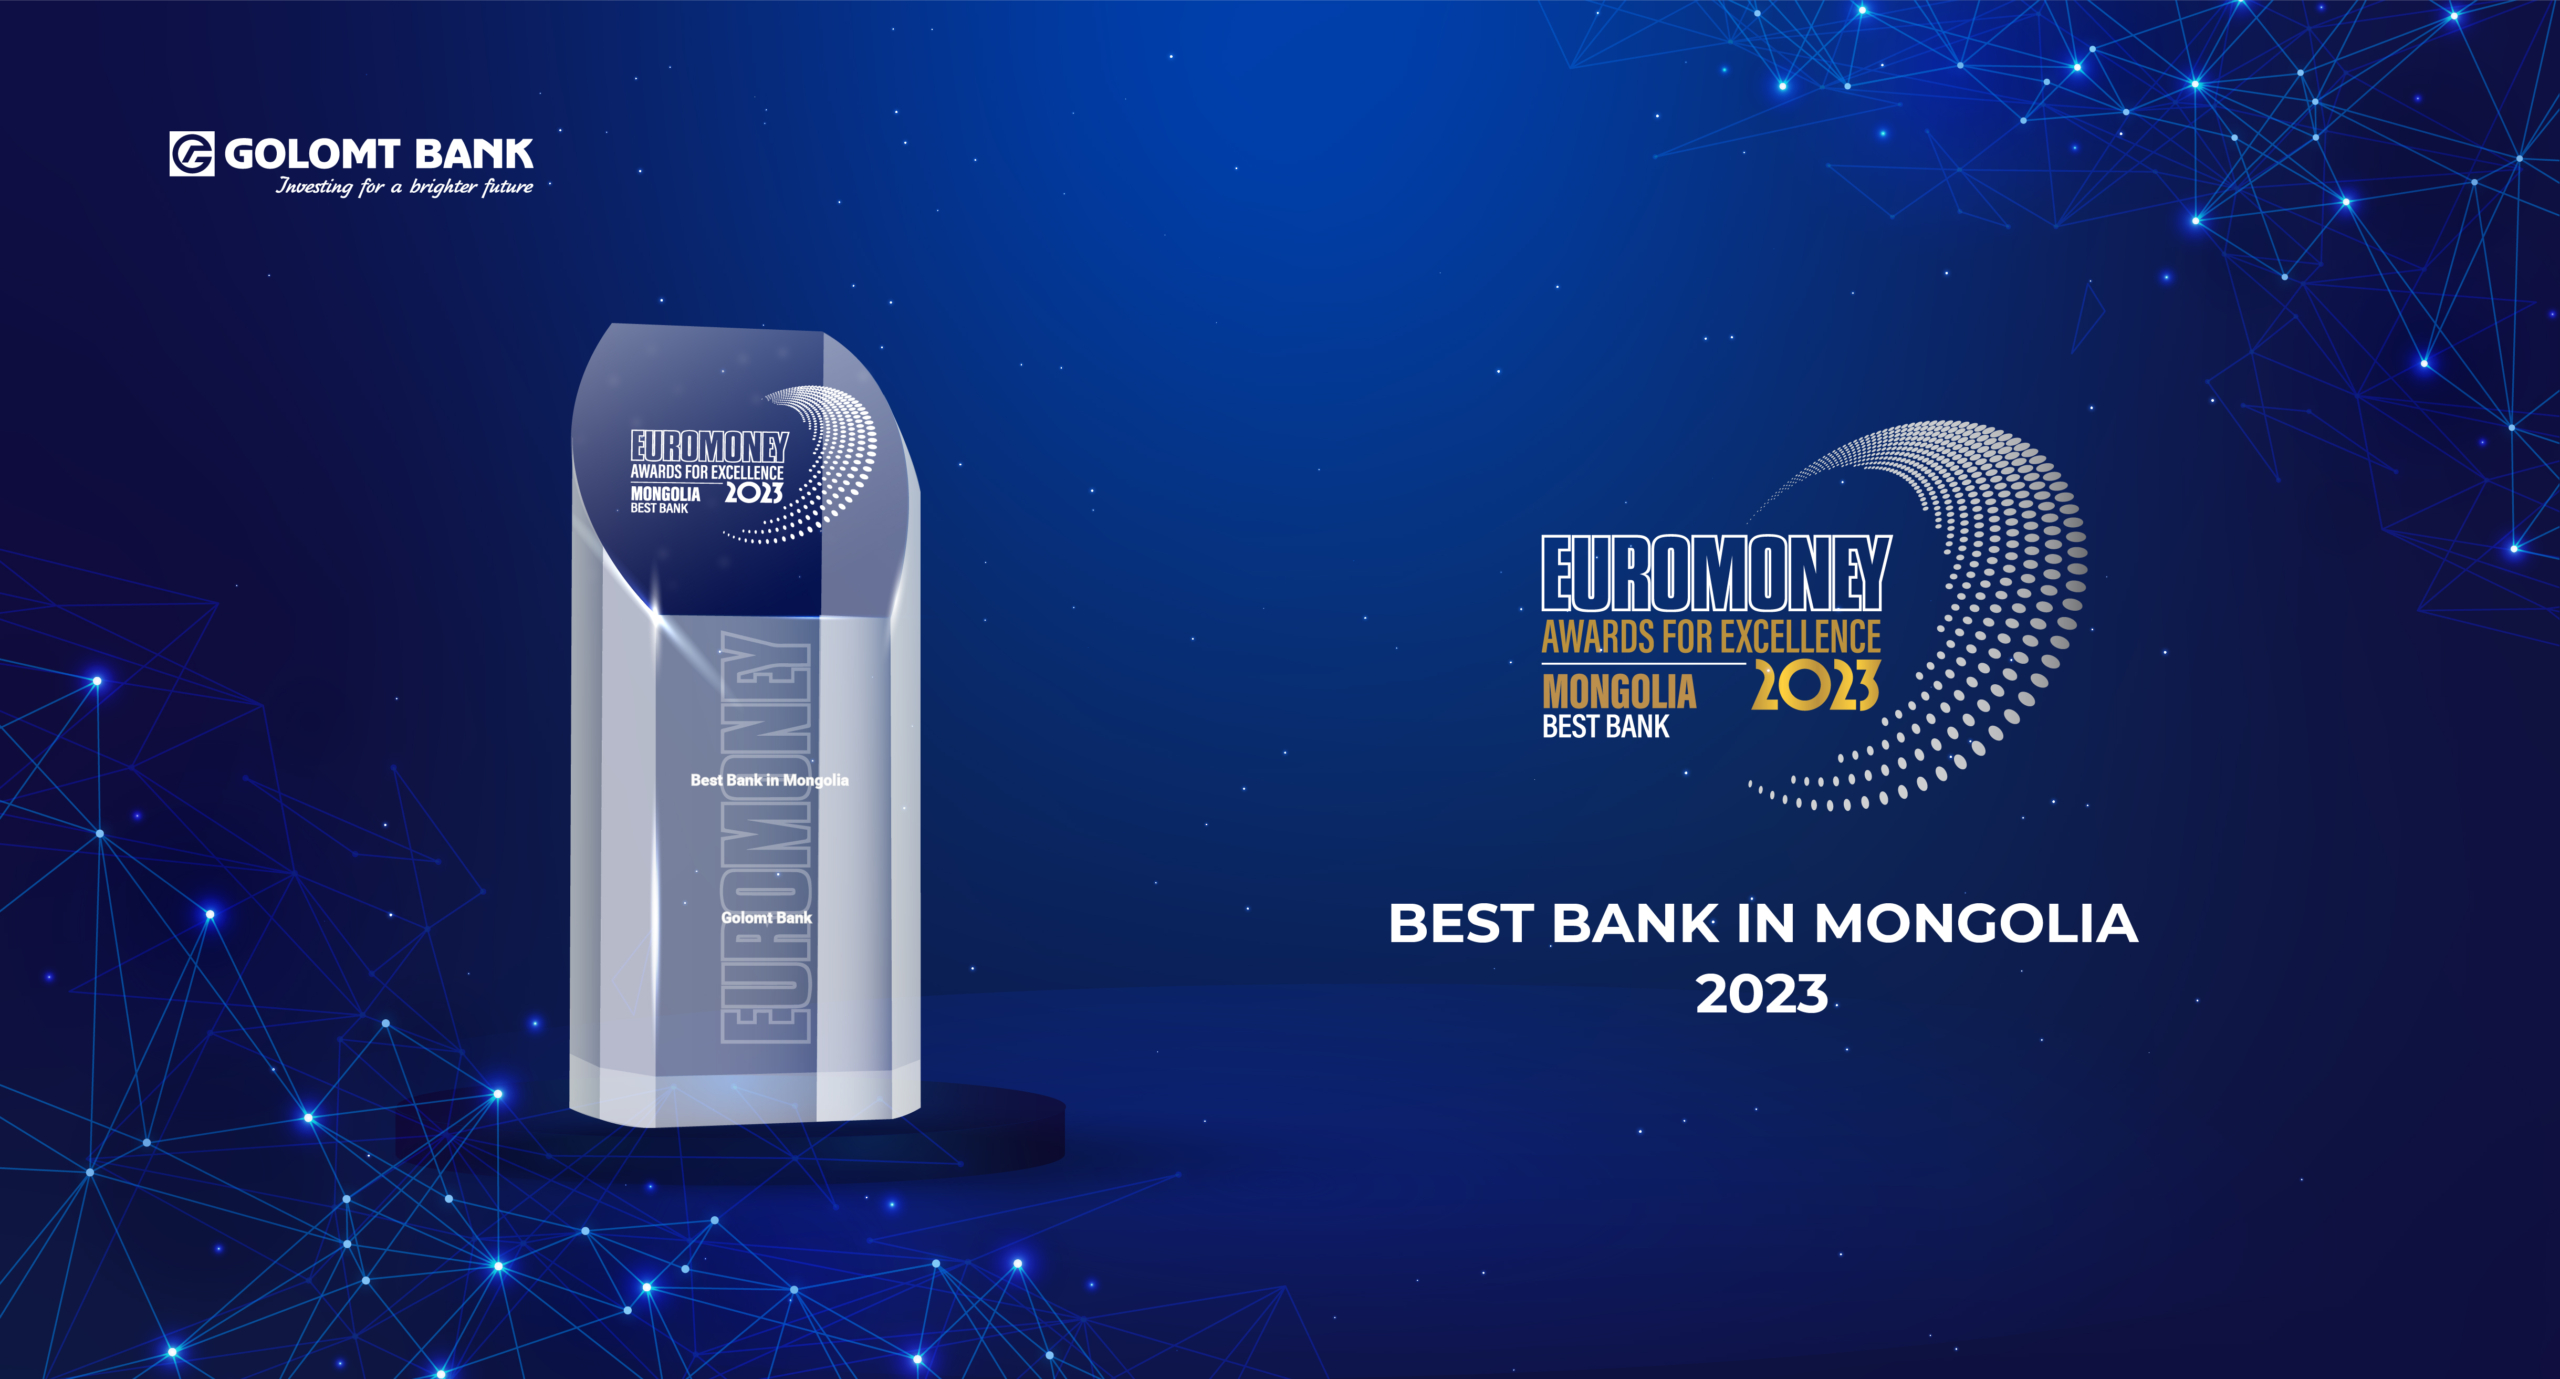 Euromoney names Golomt Bank the “Best Bank in Mongolia 2023”